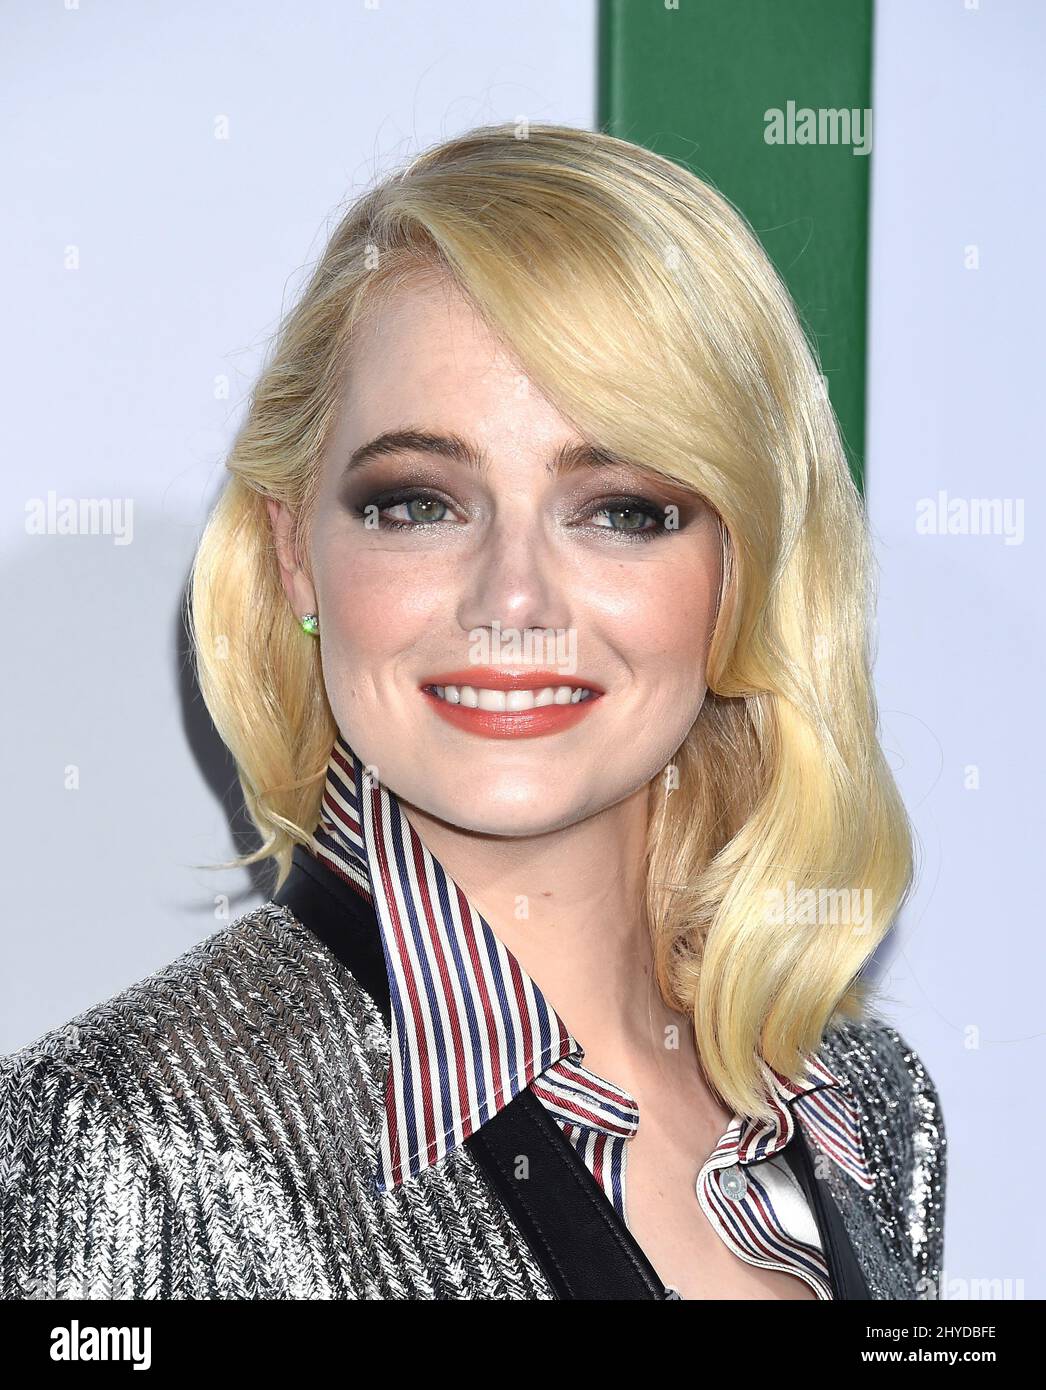 Emma Stone Goes Glam for 'Battle of the Sexes' Premiere!: Photo